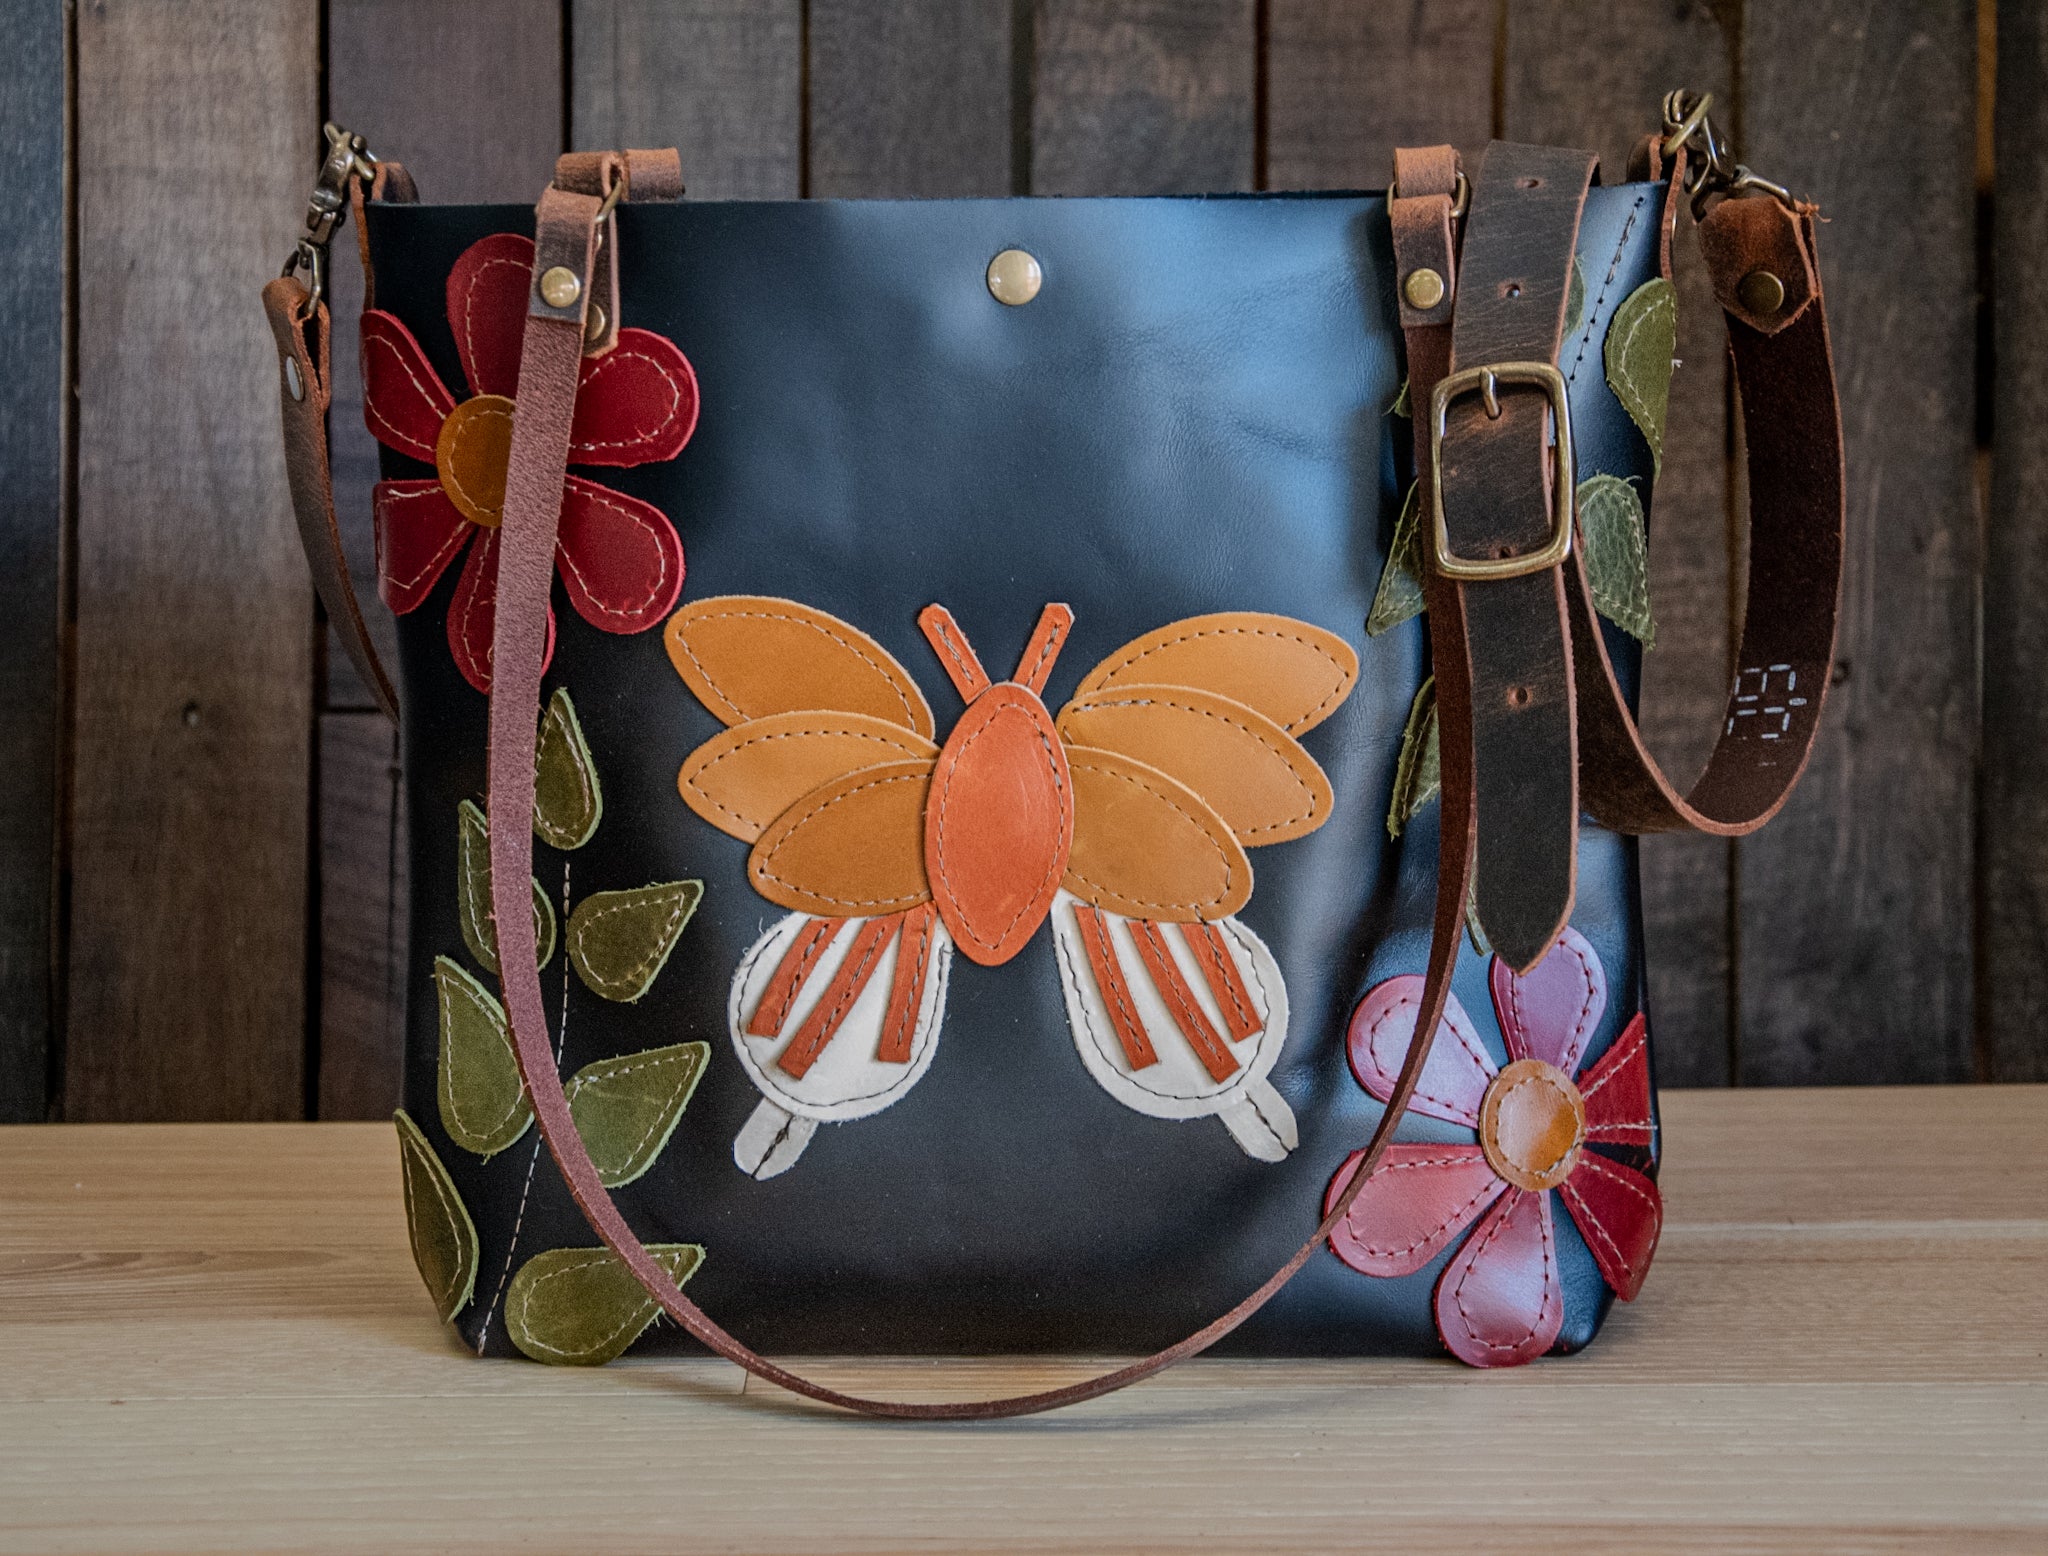 Butterfly Bag, Butterfly Saddlebag , Butterfly Crossbody, Leather Bag With  Butterflies, Butterfly Purse, Leather Anniversary Gift - Etsy | Handmade  leather bag pattern, Painted leather bag, Leather bags handmade